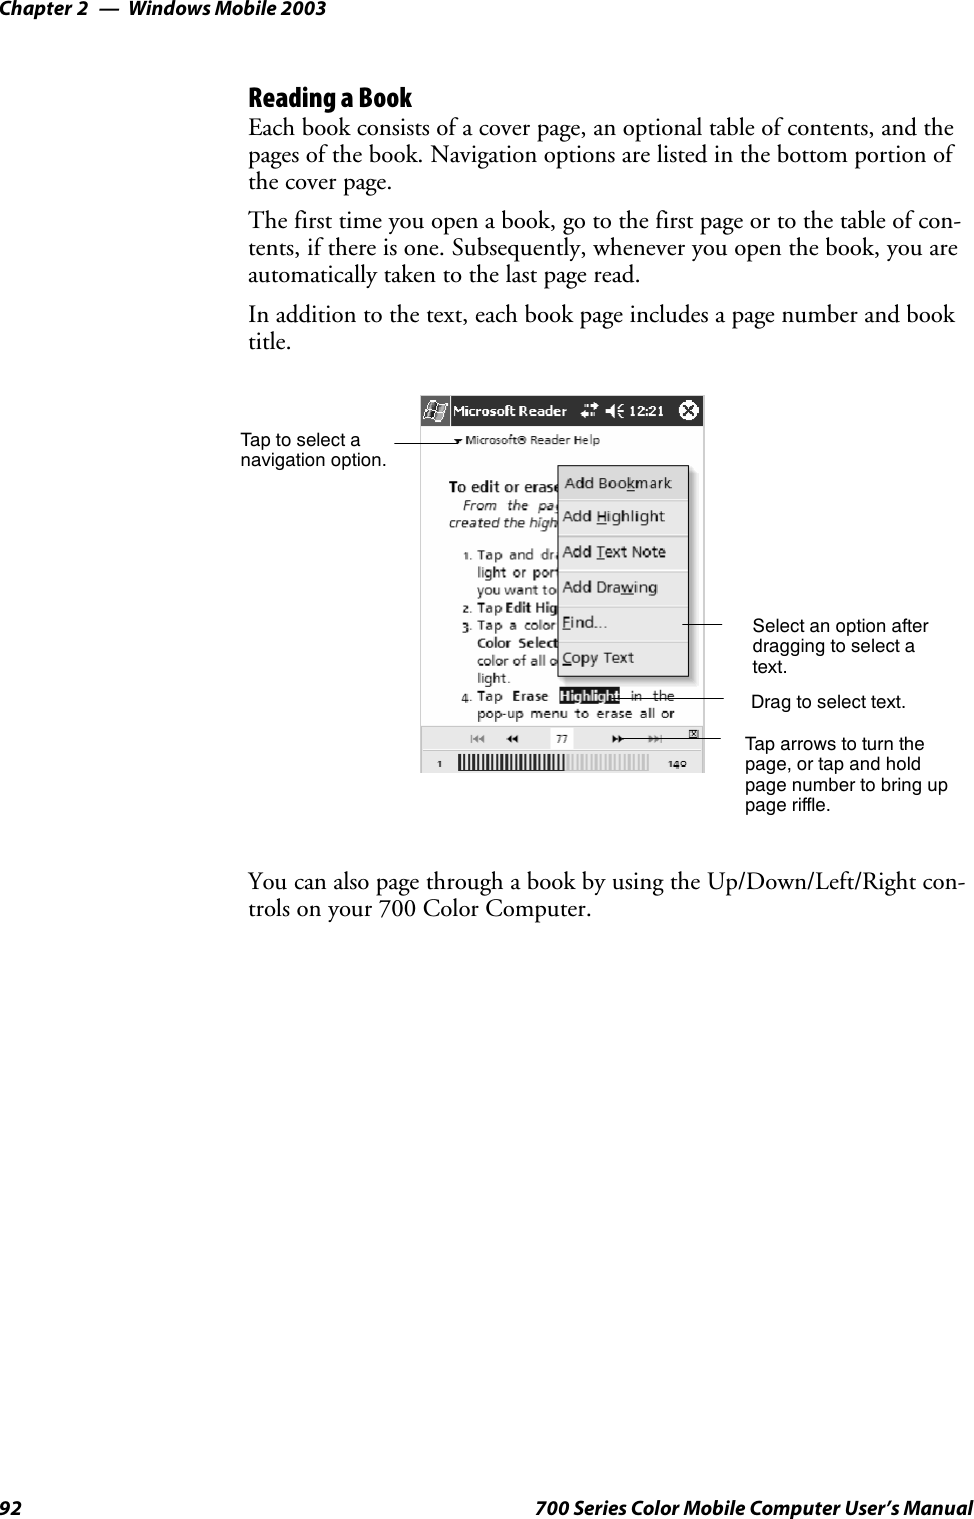 Windows Mobile 2003Chapter —292 700 Series Color Mobile Computer User’s ManualReading a BookEach book consists of a cover page, an optional table of contents, and thepages of the book. Navigation options are listed in the bottom portion ofthe cover page.Thefirsttimeyouopenabook,gotothefirstpageortothetableofcon-tents, if there is one. Subsequently, whenever you open the book, you areautomatically taken to the last page read.In addition to the text, each book page includes a page number and booktitle.Taptoselectanavigation option.Select an option afterdragging to select atext.Drag to select text.Tap arrows to turn thepage, or tap and holdpage number to bring uppage riffle.You can also page through a book by using the Up/Down/Left/Right con-trols on your 700 Color Computer.